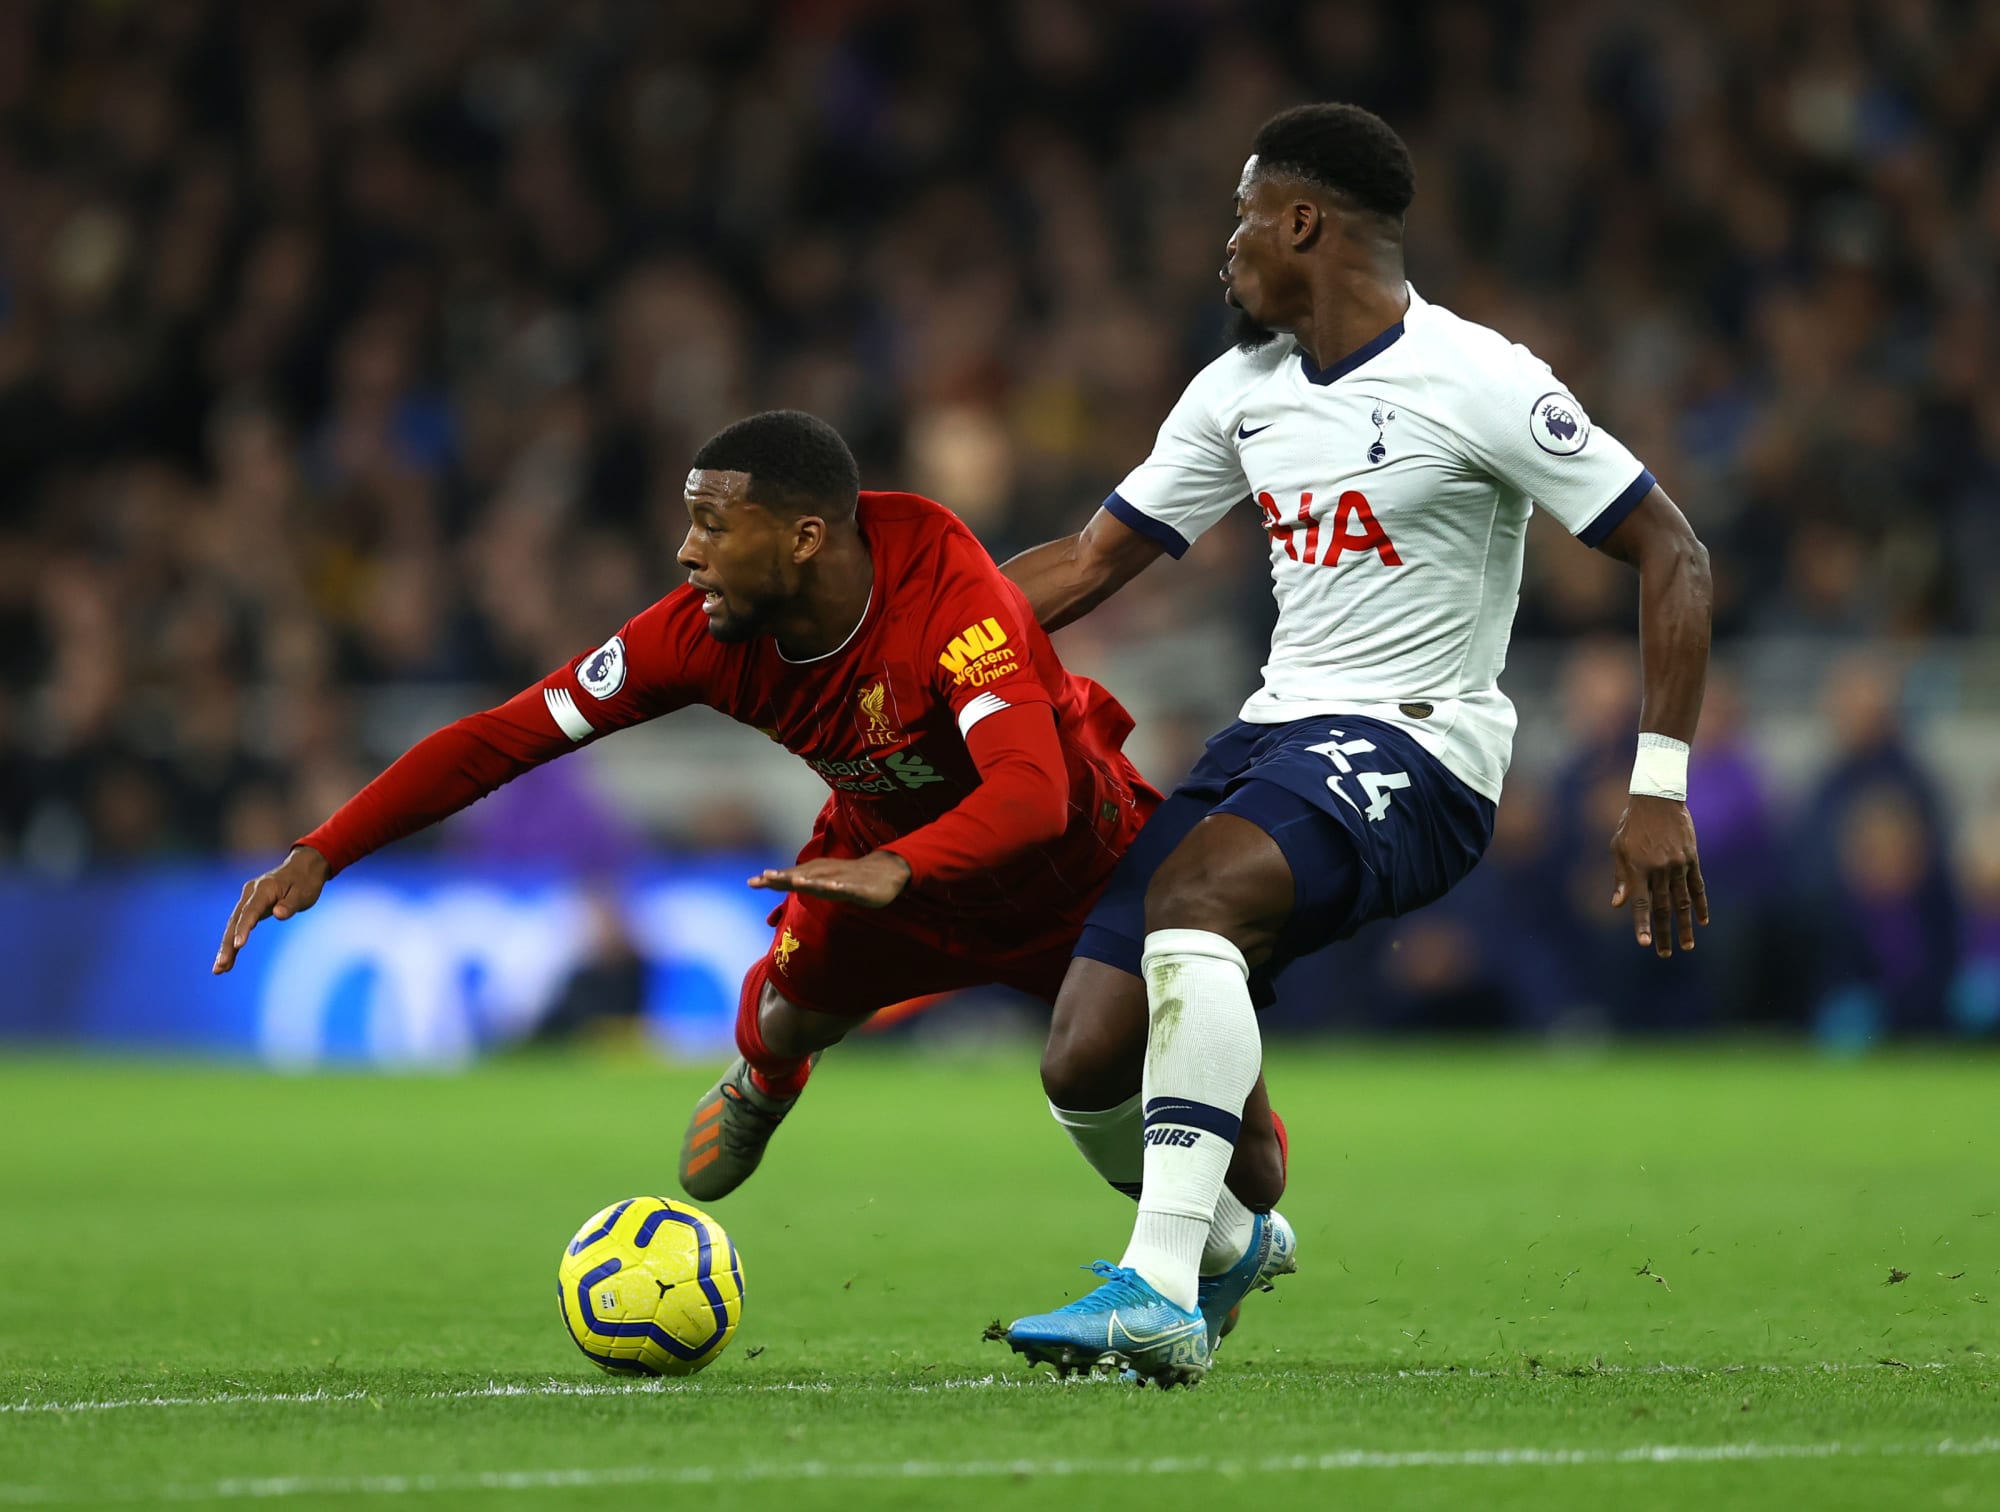 Tottenham Hotspur cannot afford to lose this player